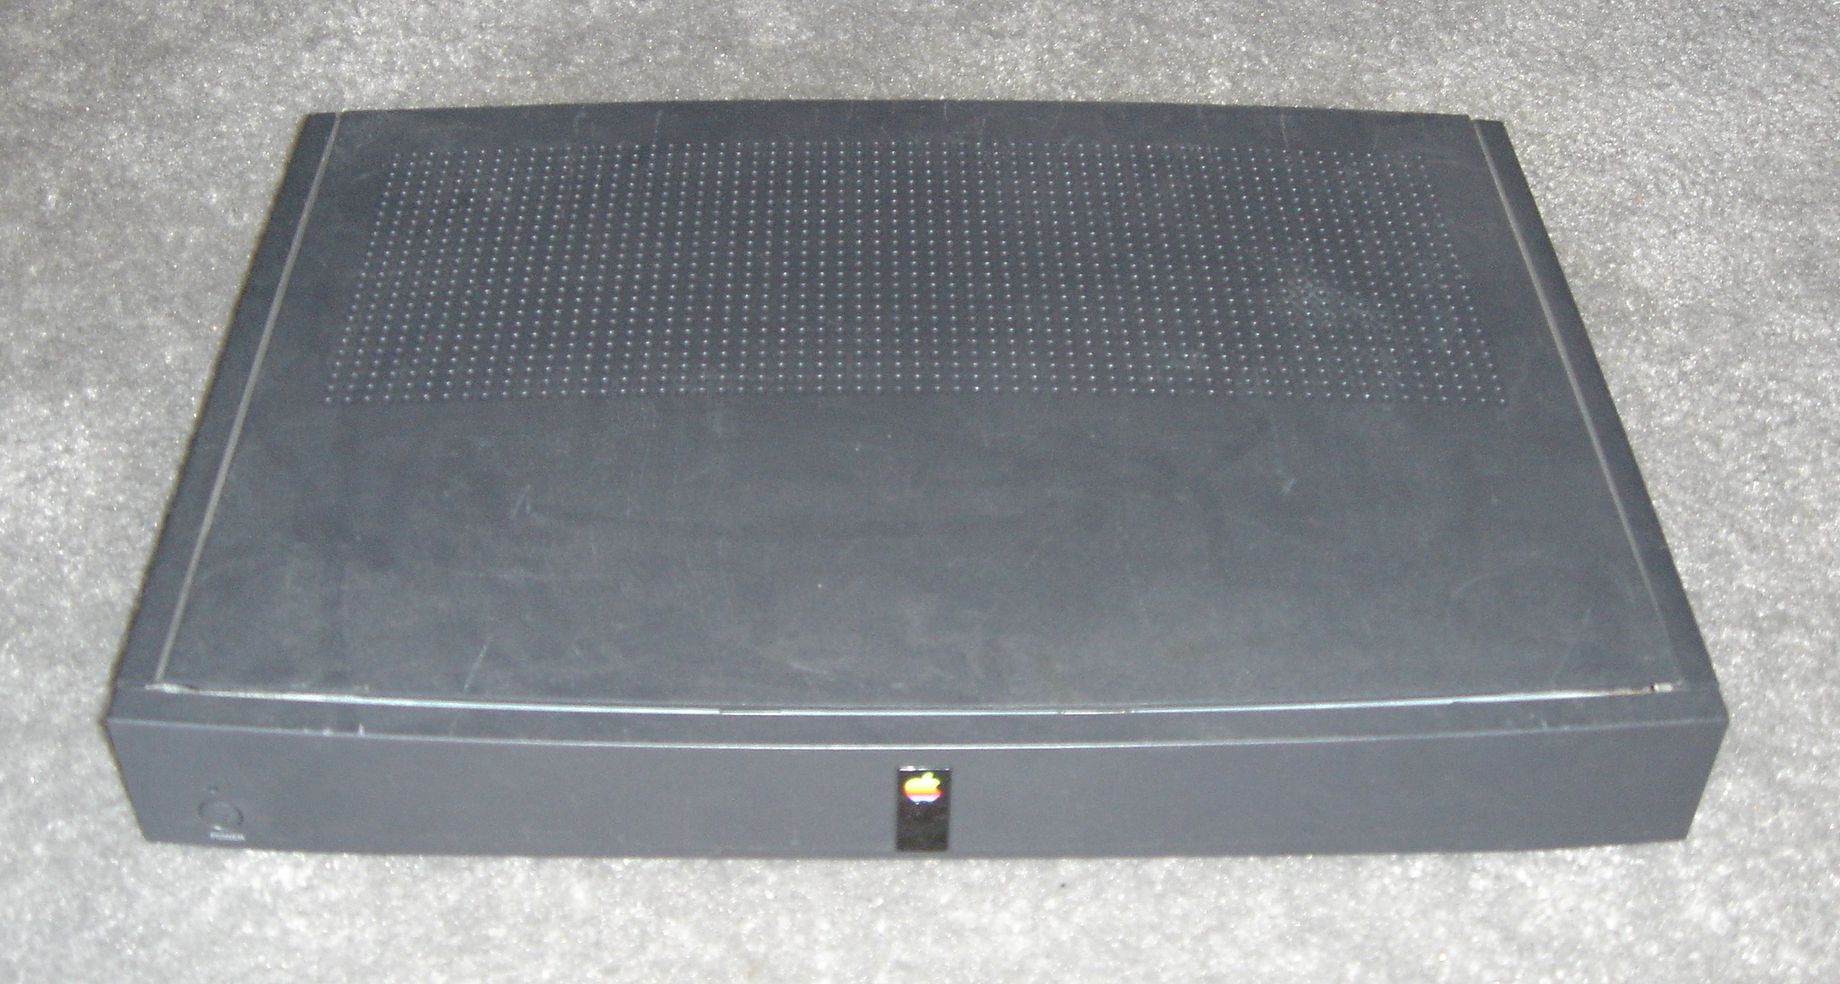 An image of the Apple Interactive Television Box, which was never fully released